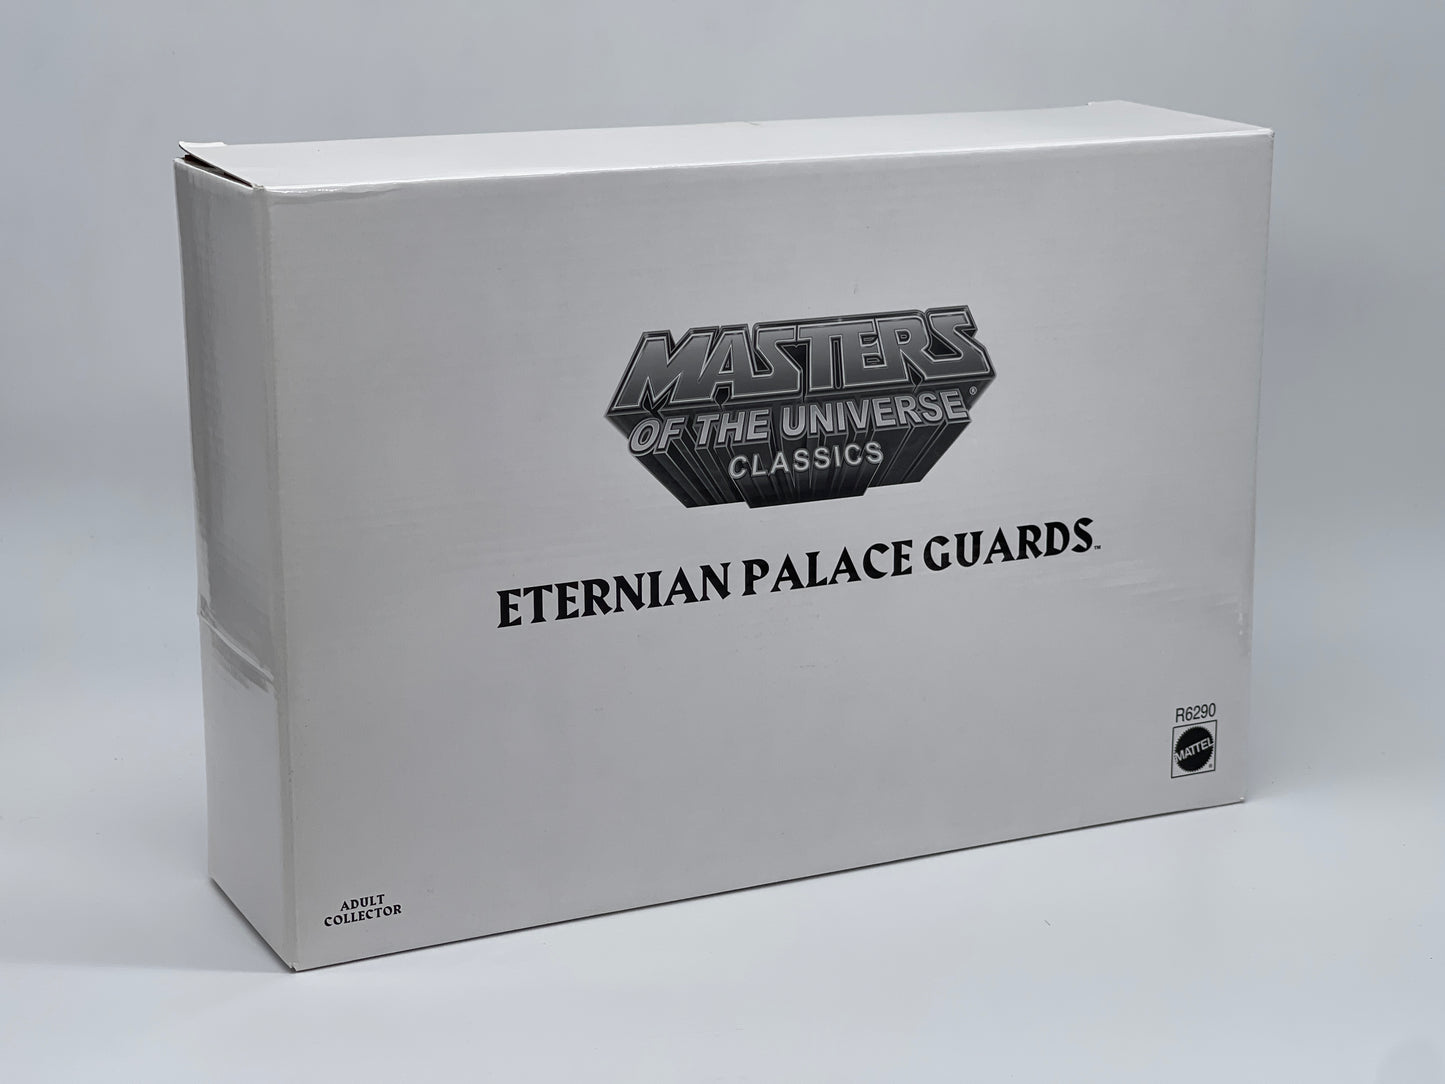 Masters of the Universe Classics "Eternian Palace Guards" mit Mailerbox sealed (2010)